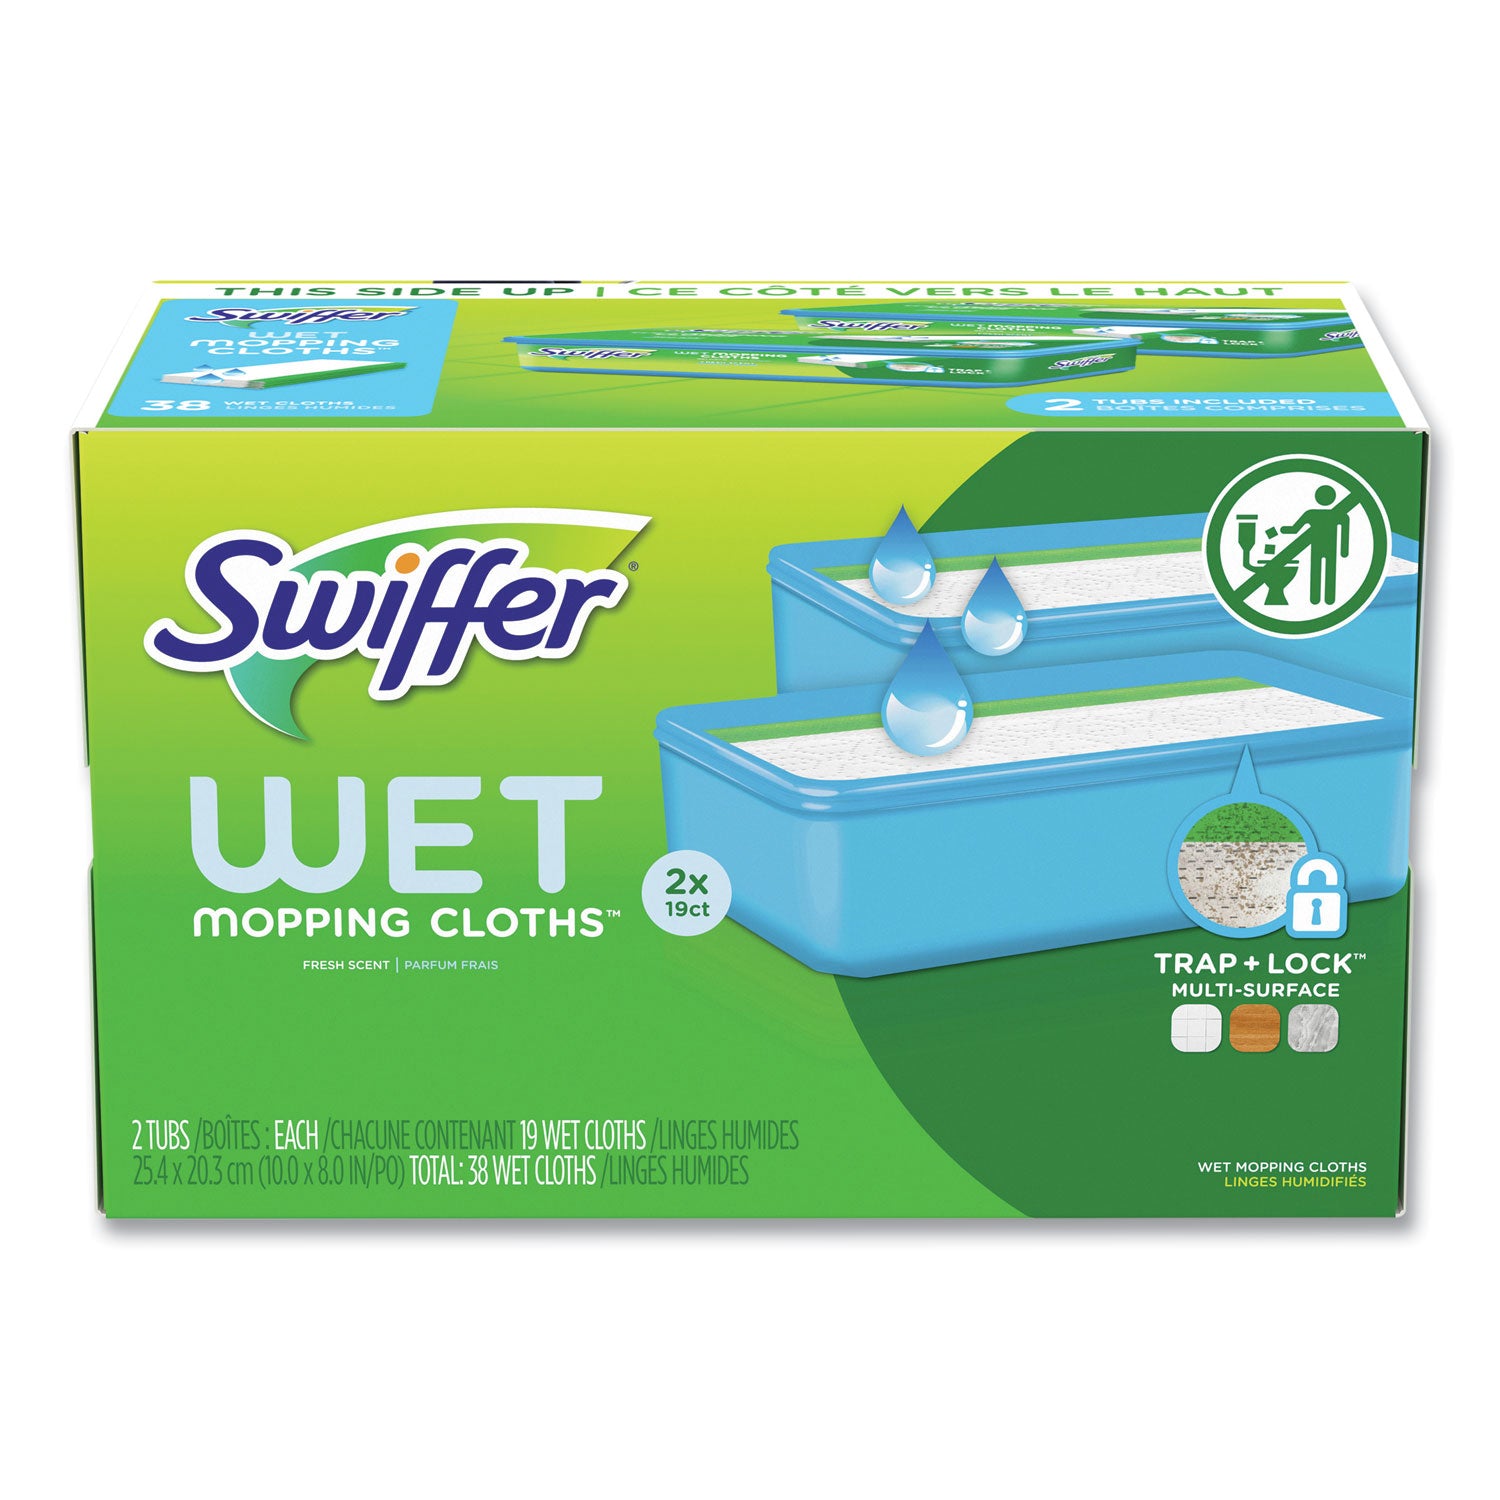 sweeper-trap-+-lock-wet-mop-cloth-8-x-10-white-open-window-scent-38-pack_pgc00742 - 1